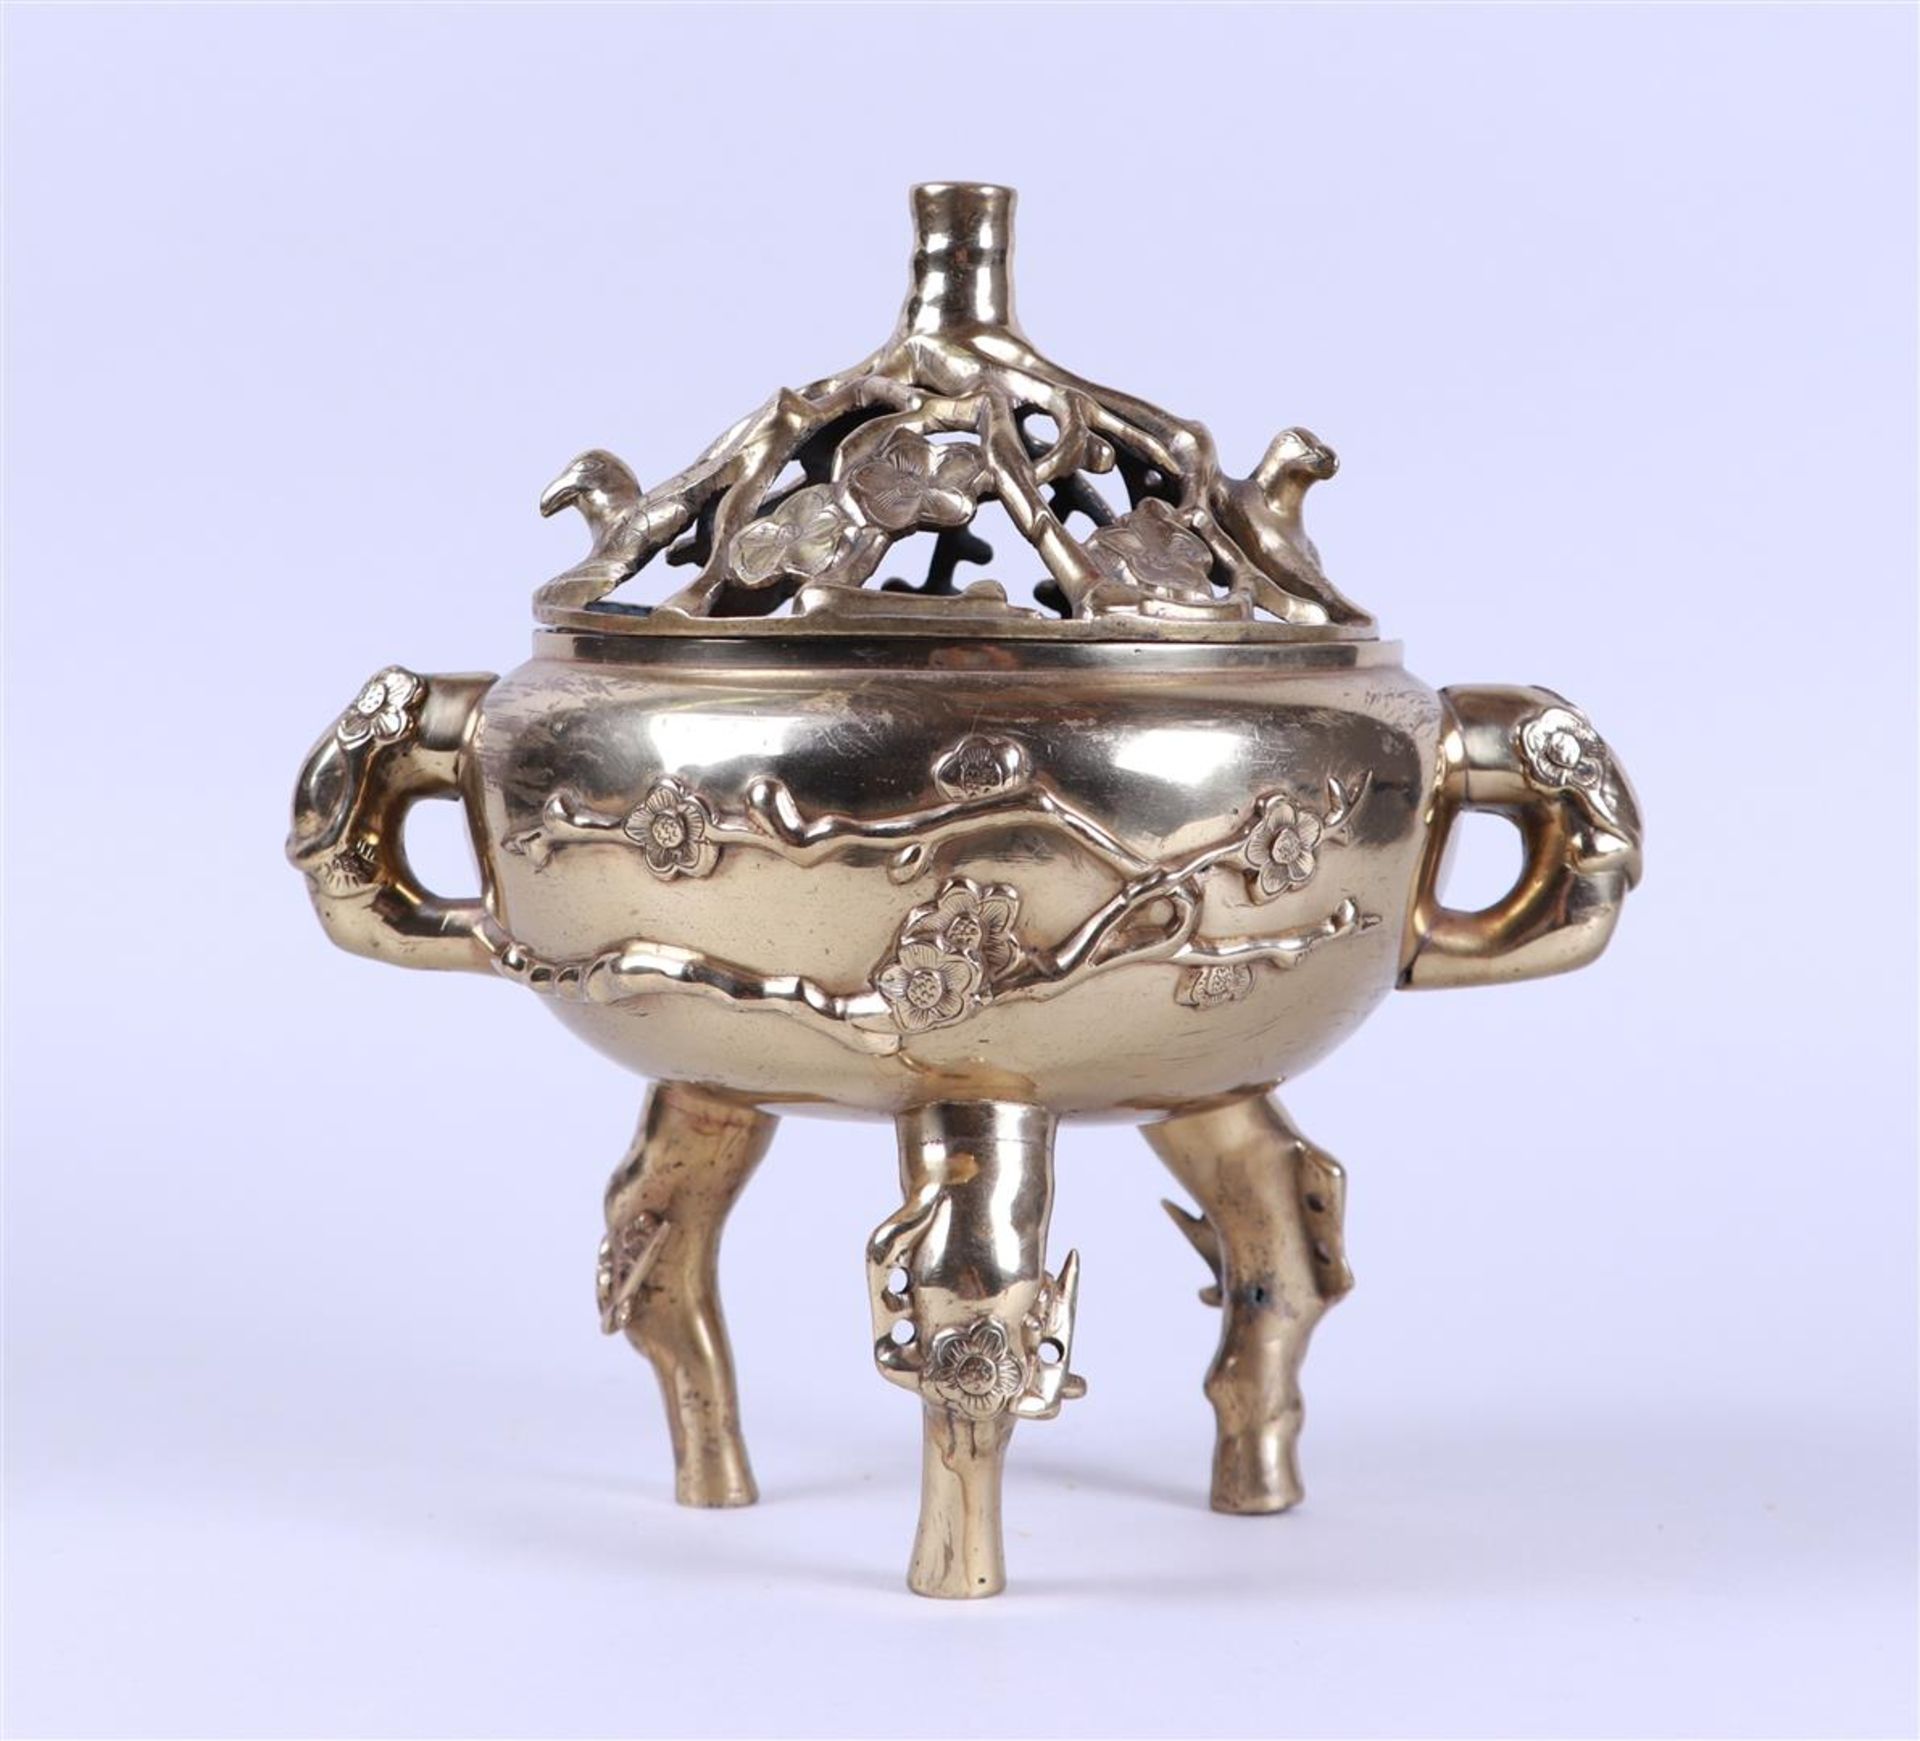 A bronze incense burner decorated with blossom branches, marked on the bottom. China, late 19th cent